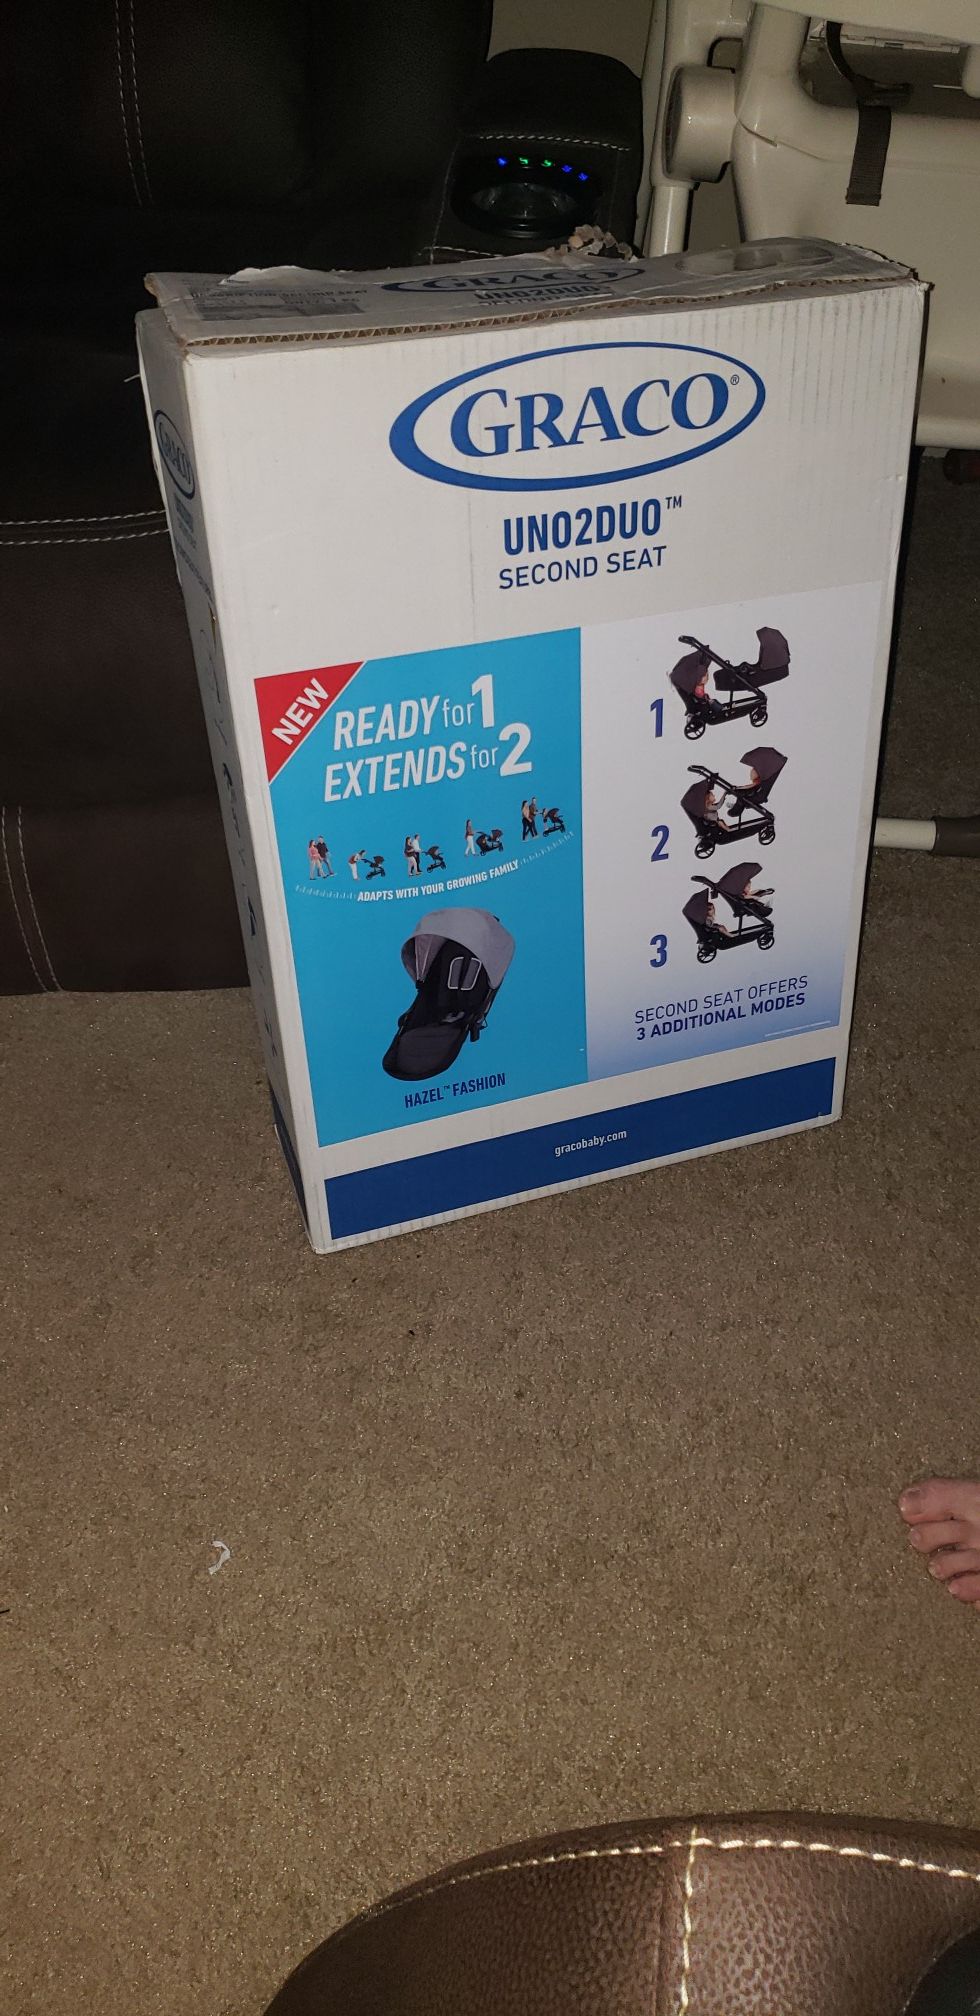 Graco Uno2duo second SEAT not the stroller